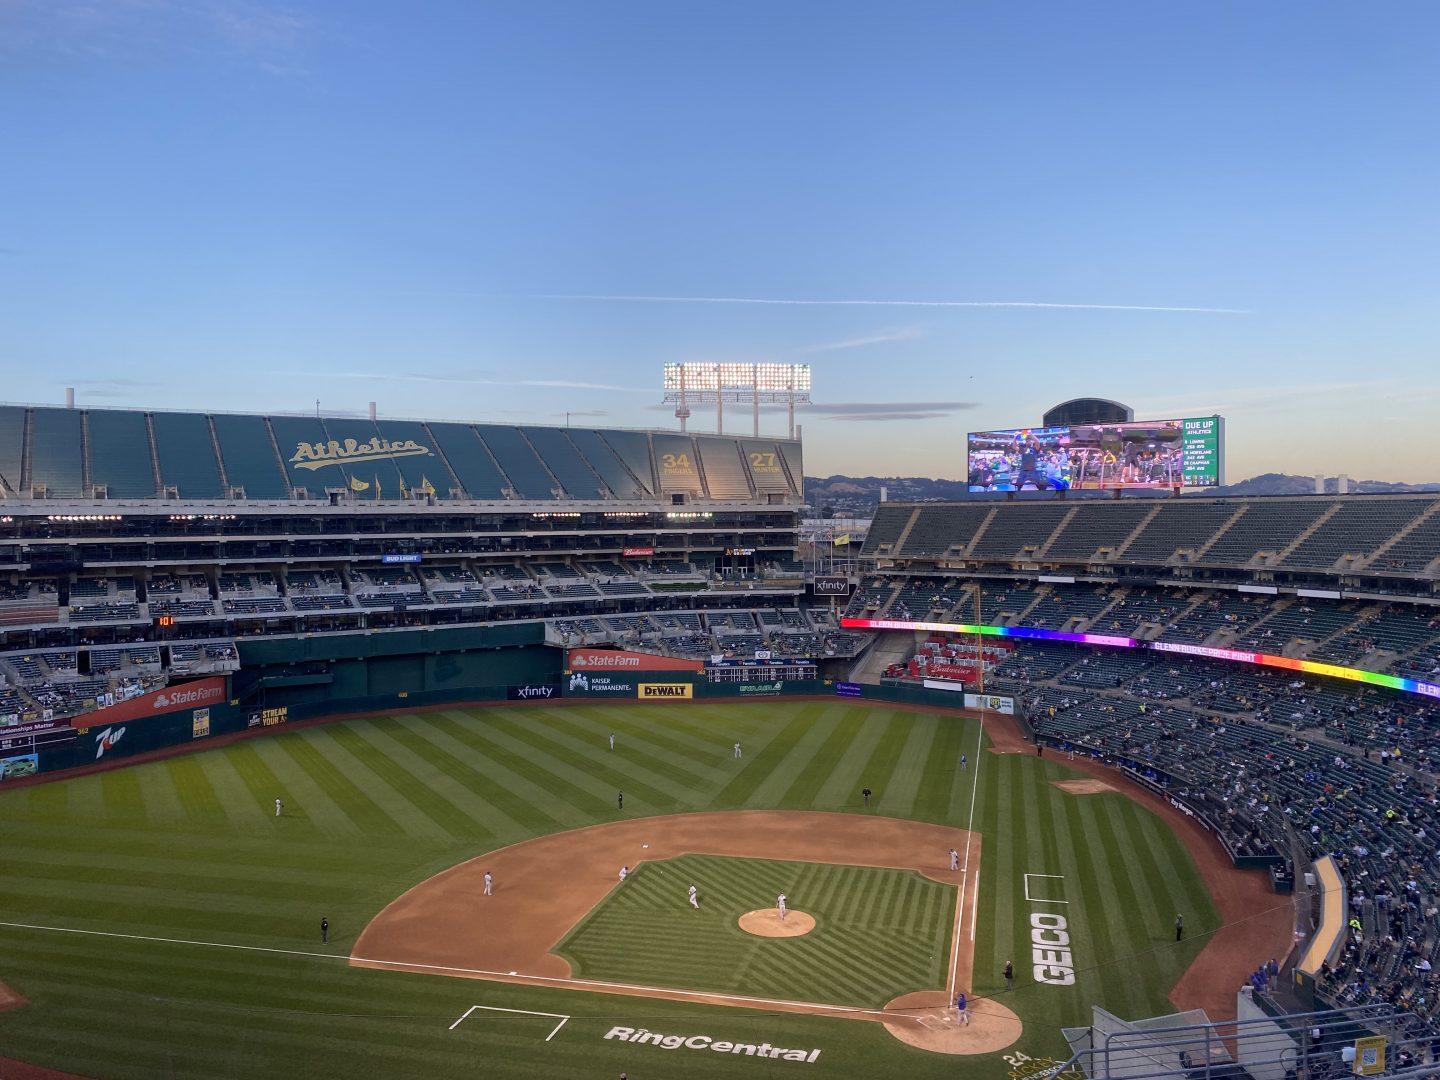 The sunsets at RingCentral Coliseum in Oakland, Calif. as the Oakland As take on the Kansas City Royals on Friday, June 11, 2021 (JesÃºs Cano/The Collegian)